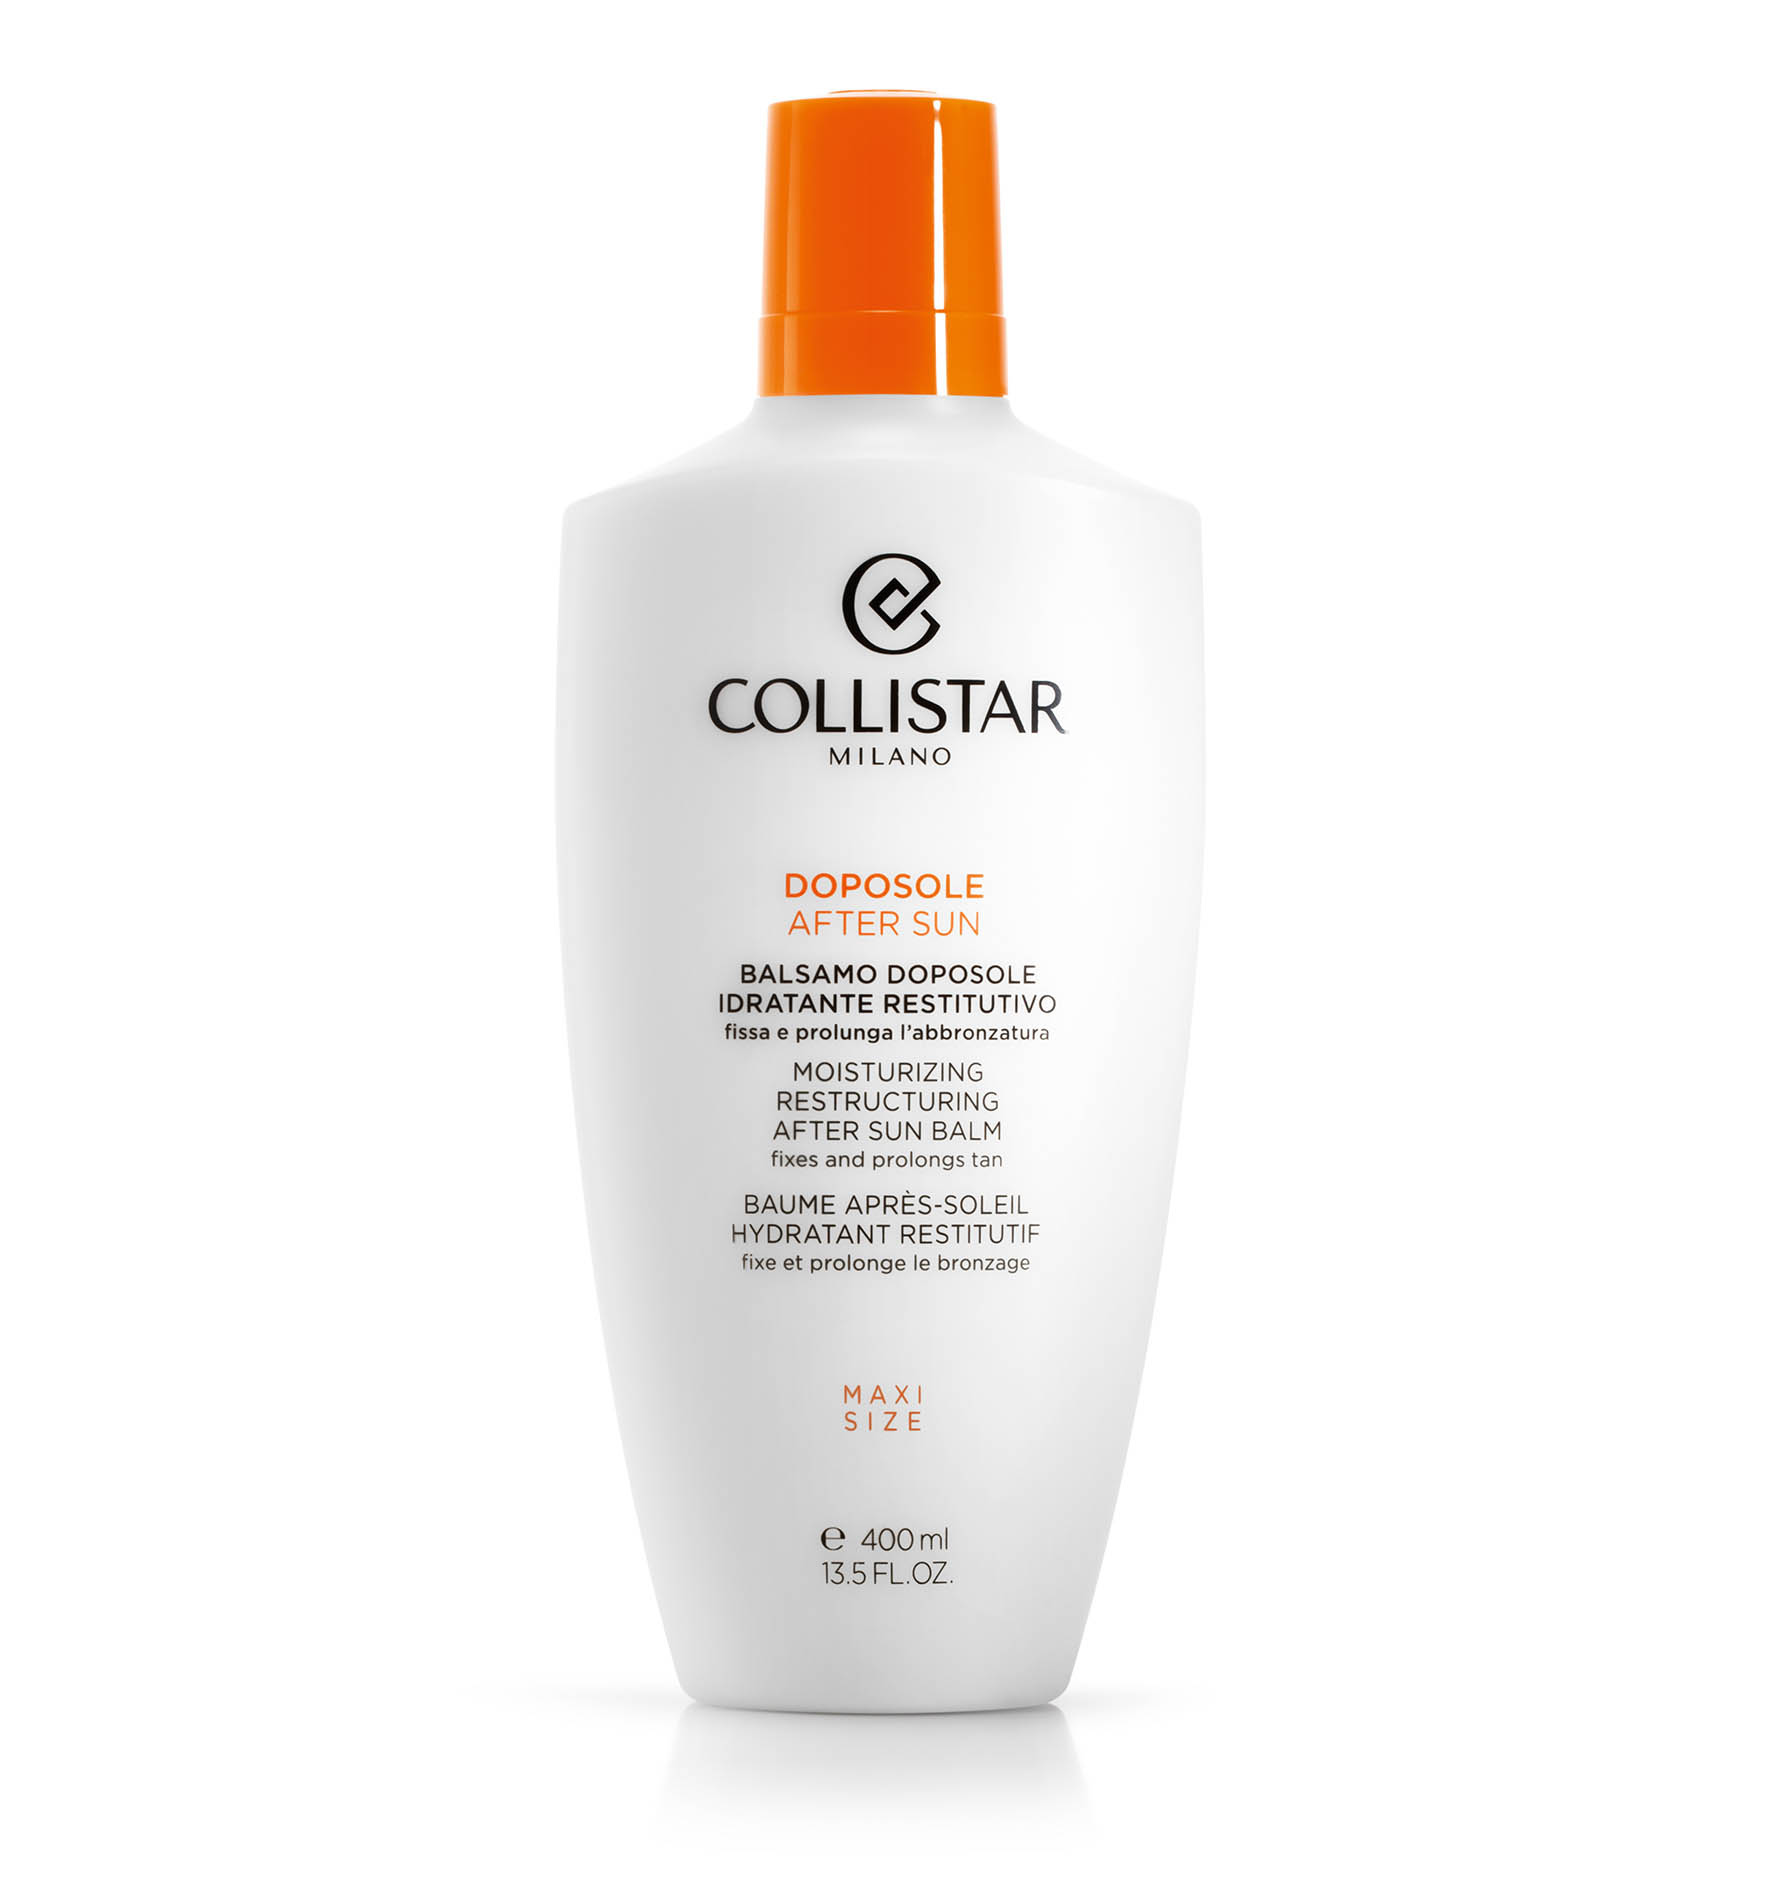 MOISTURIZING RESTRUCTURING AFTER SUN BALM - Soothing | Collistar - Shop Online Ufficiale